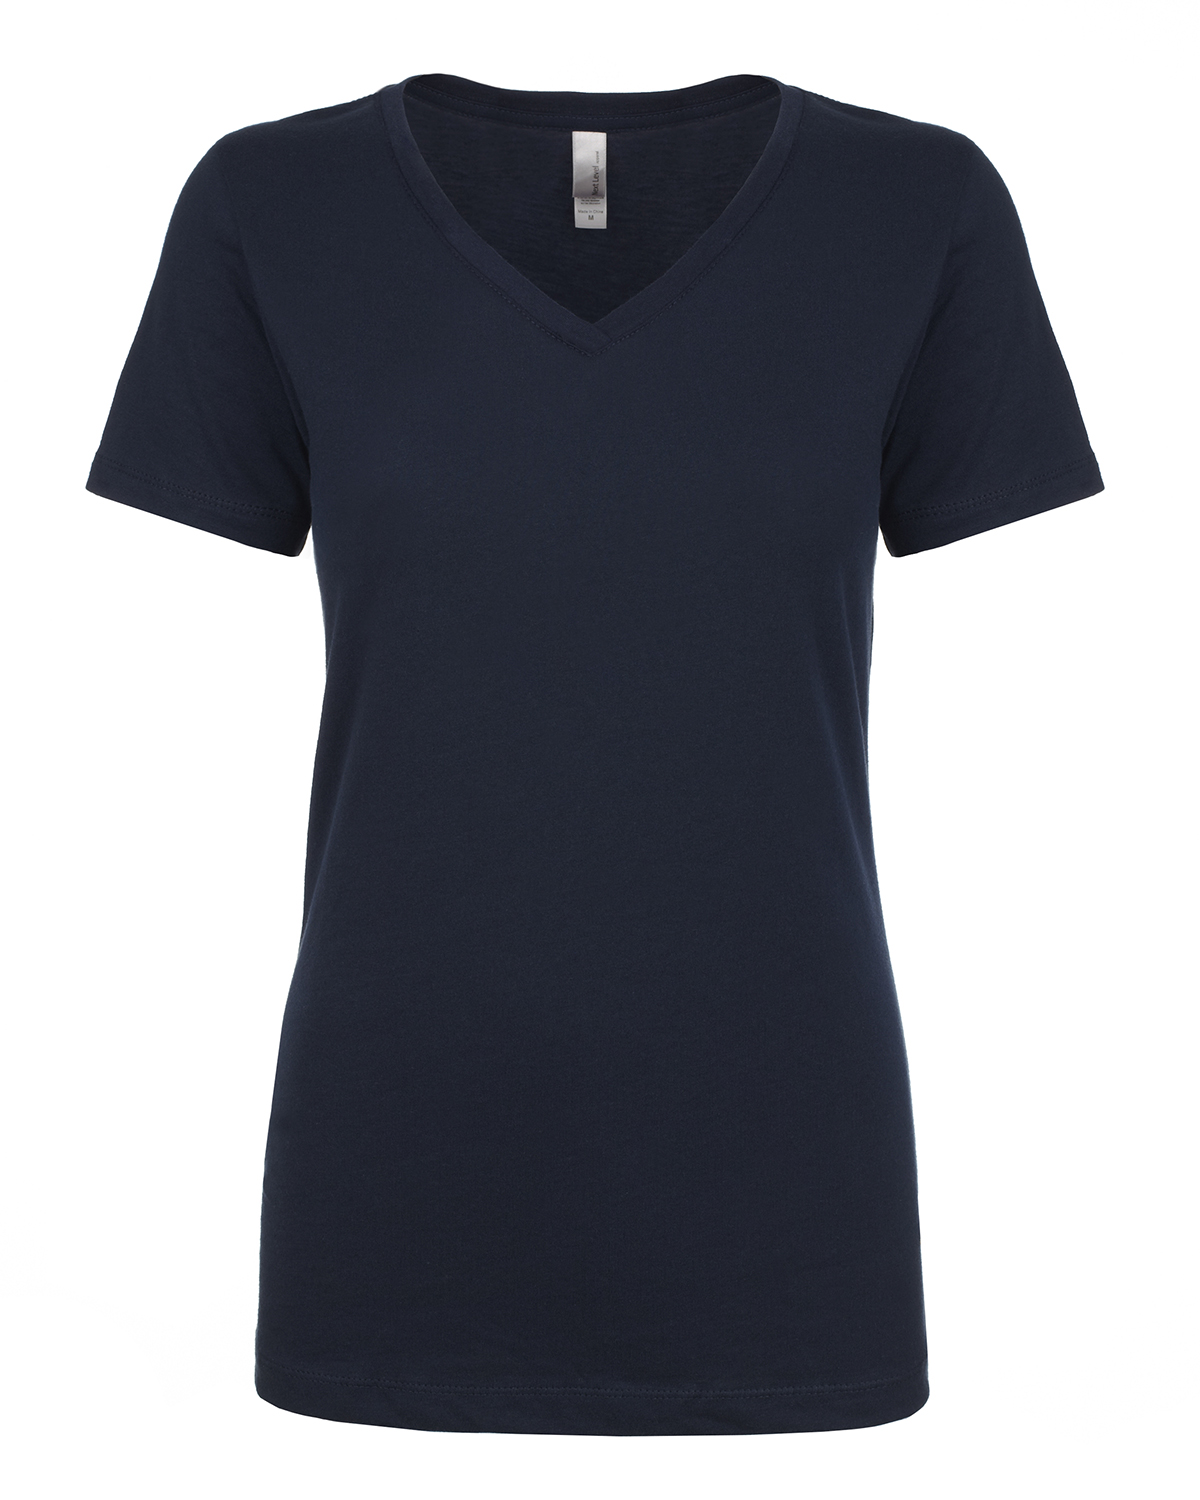 click to view MIDNIGHT NAVY